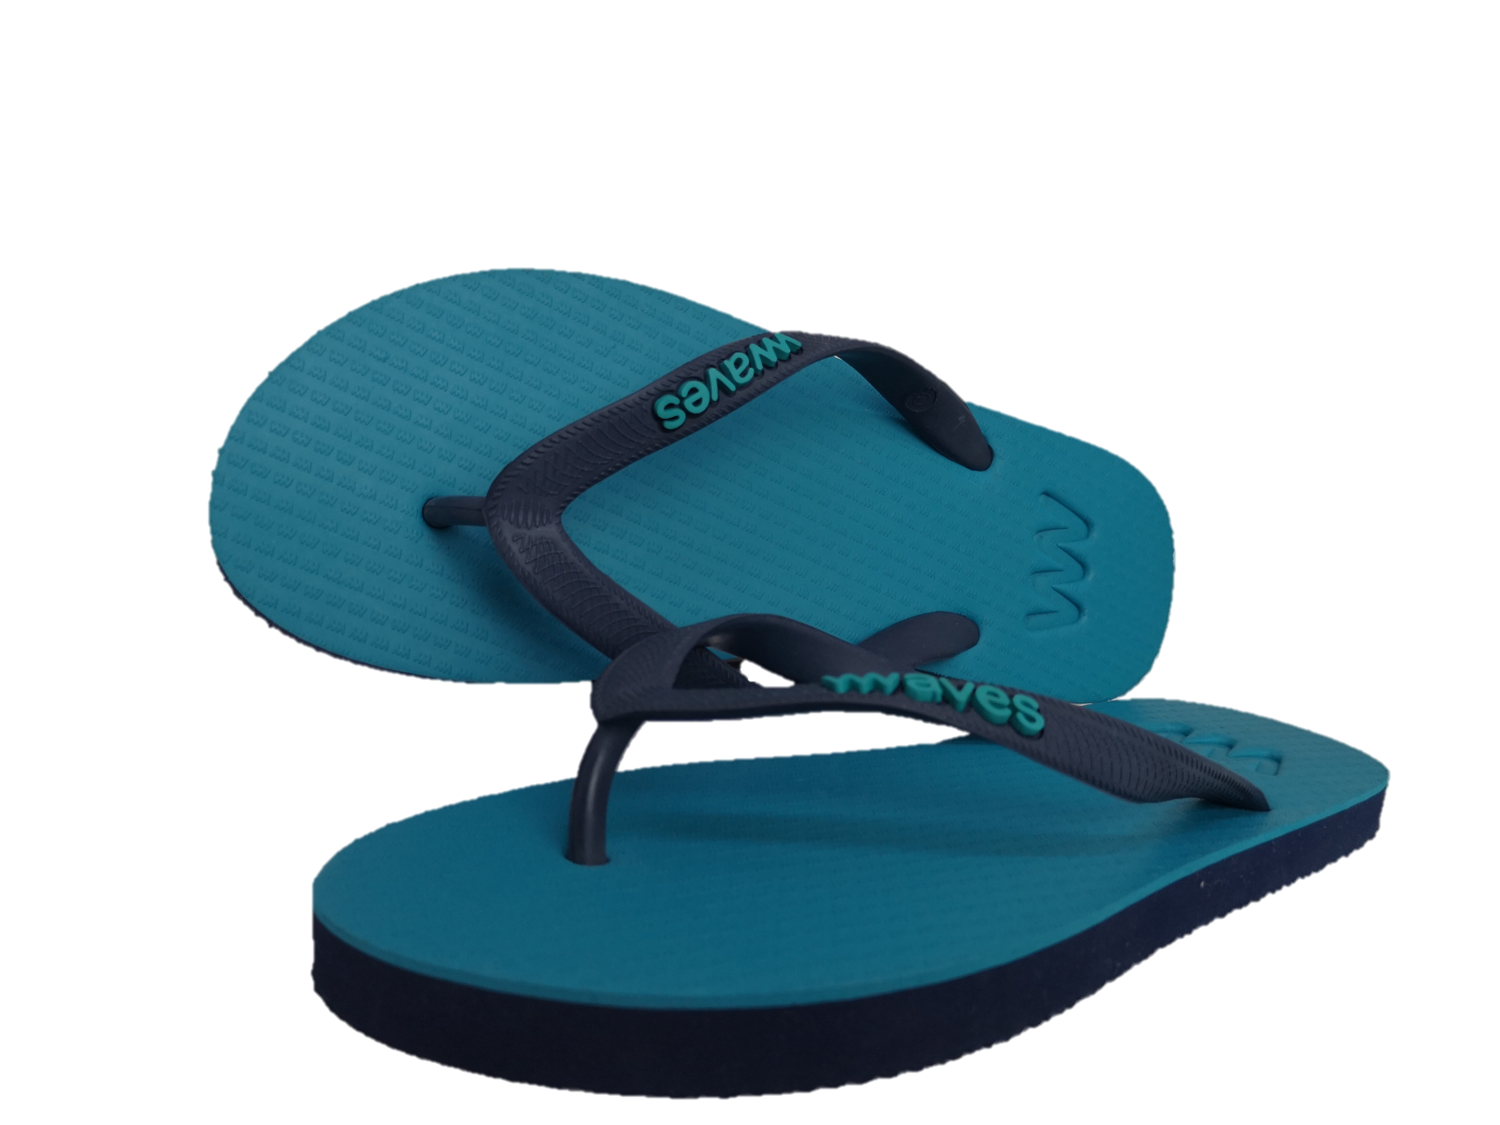 100% Natural Rubber Flip Flop - Turquoise & Navy Two Tone - 10